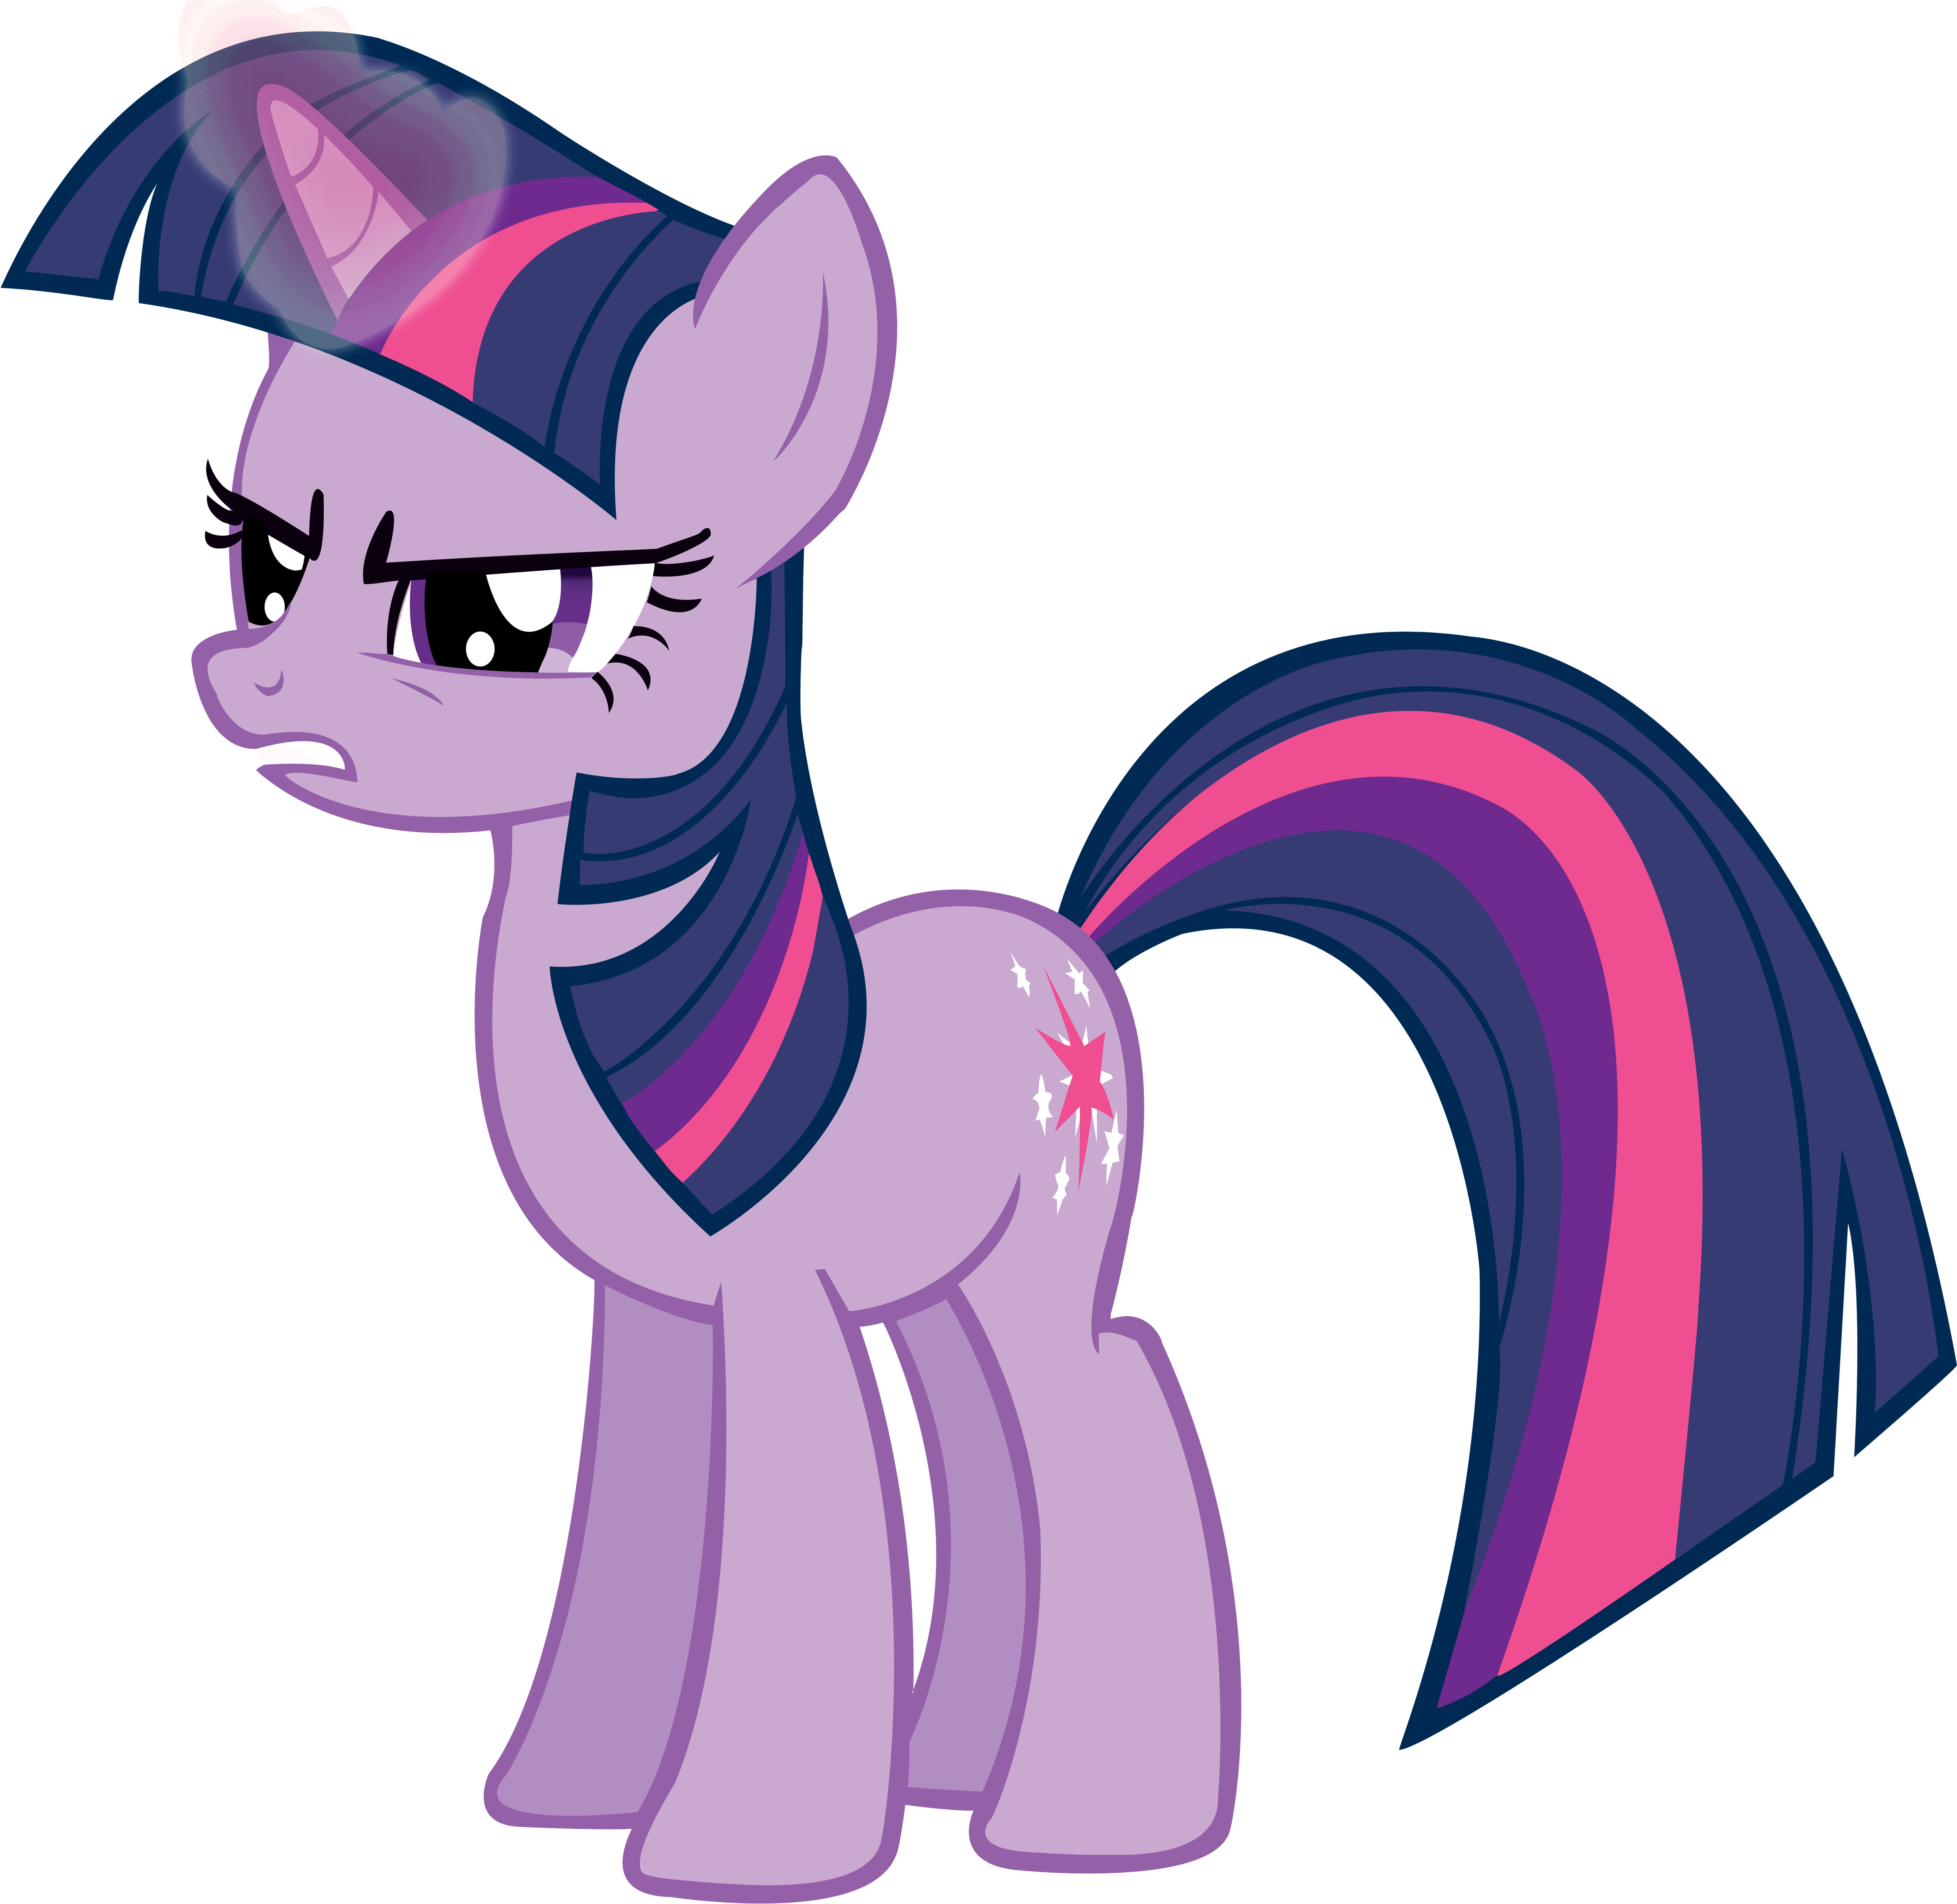 1000 Images About 21st On Pinterest My Little Pony - Friendship Is Magic Twilight Sparkle (6000x6000)